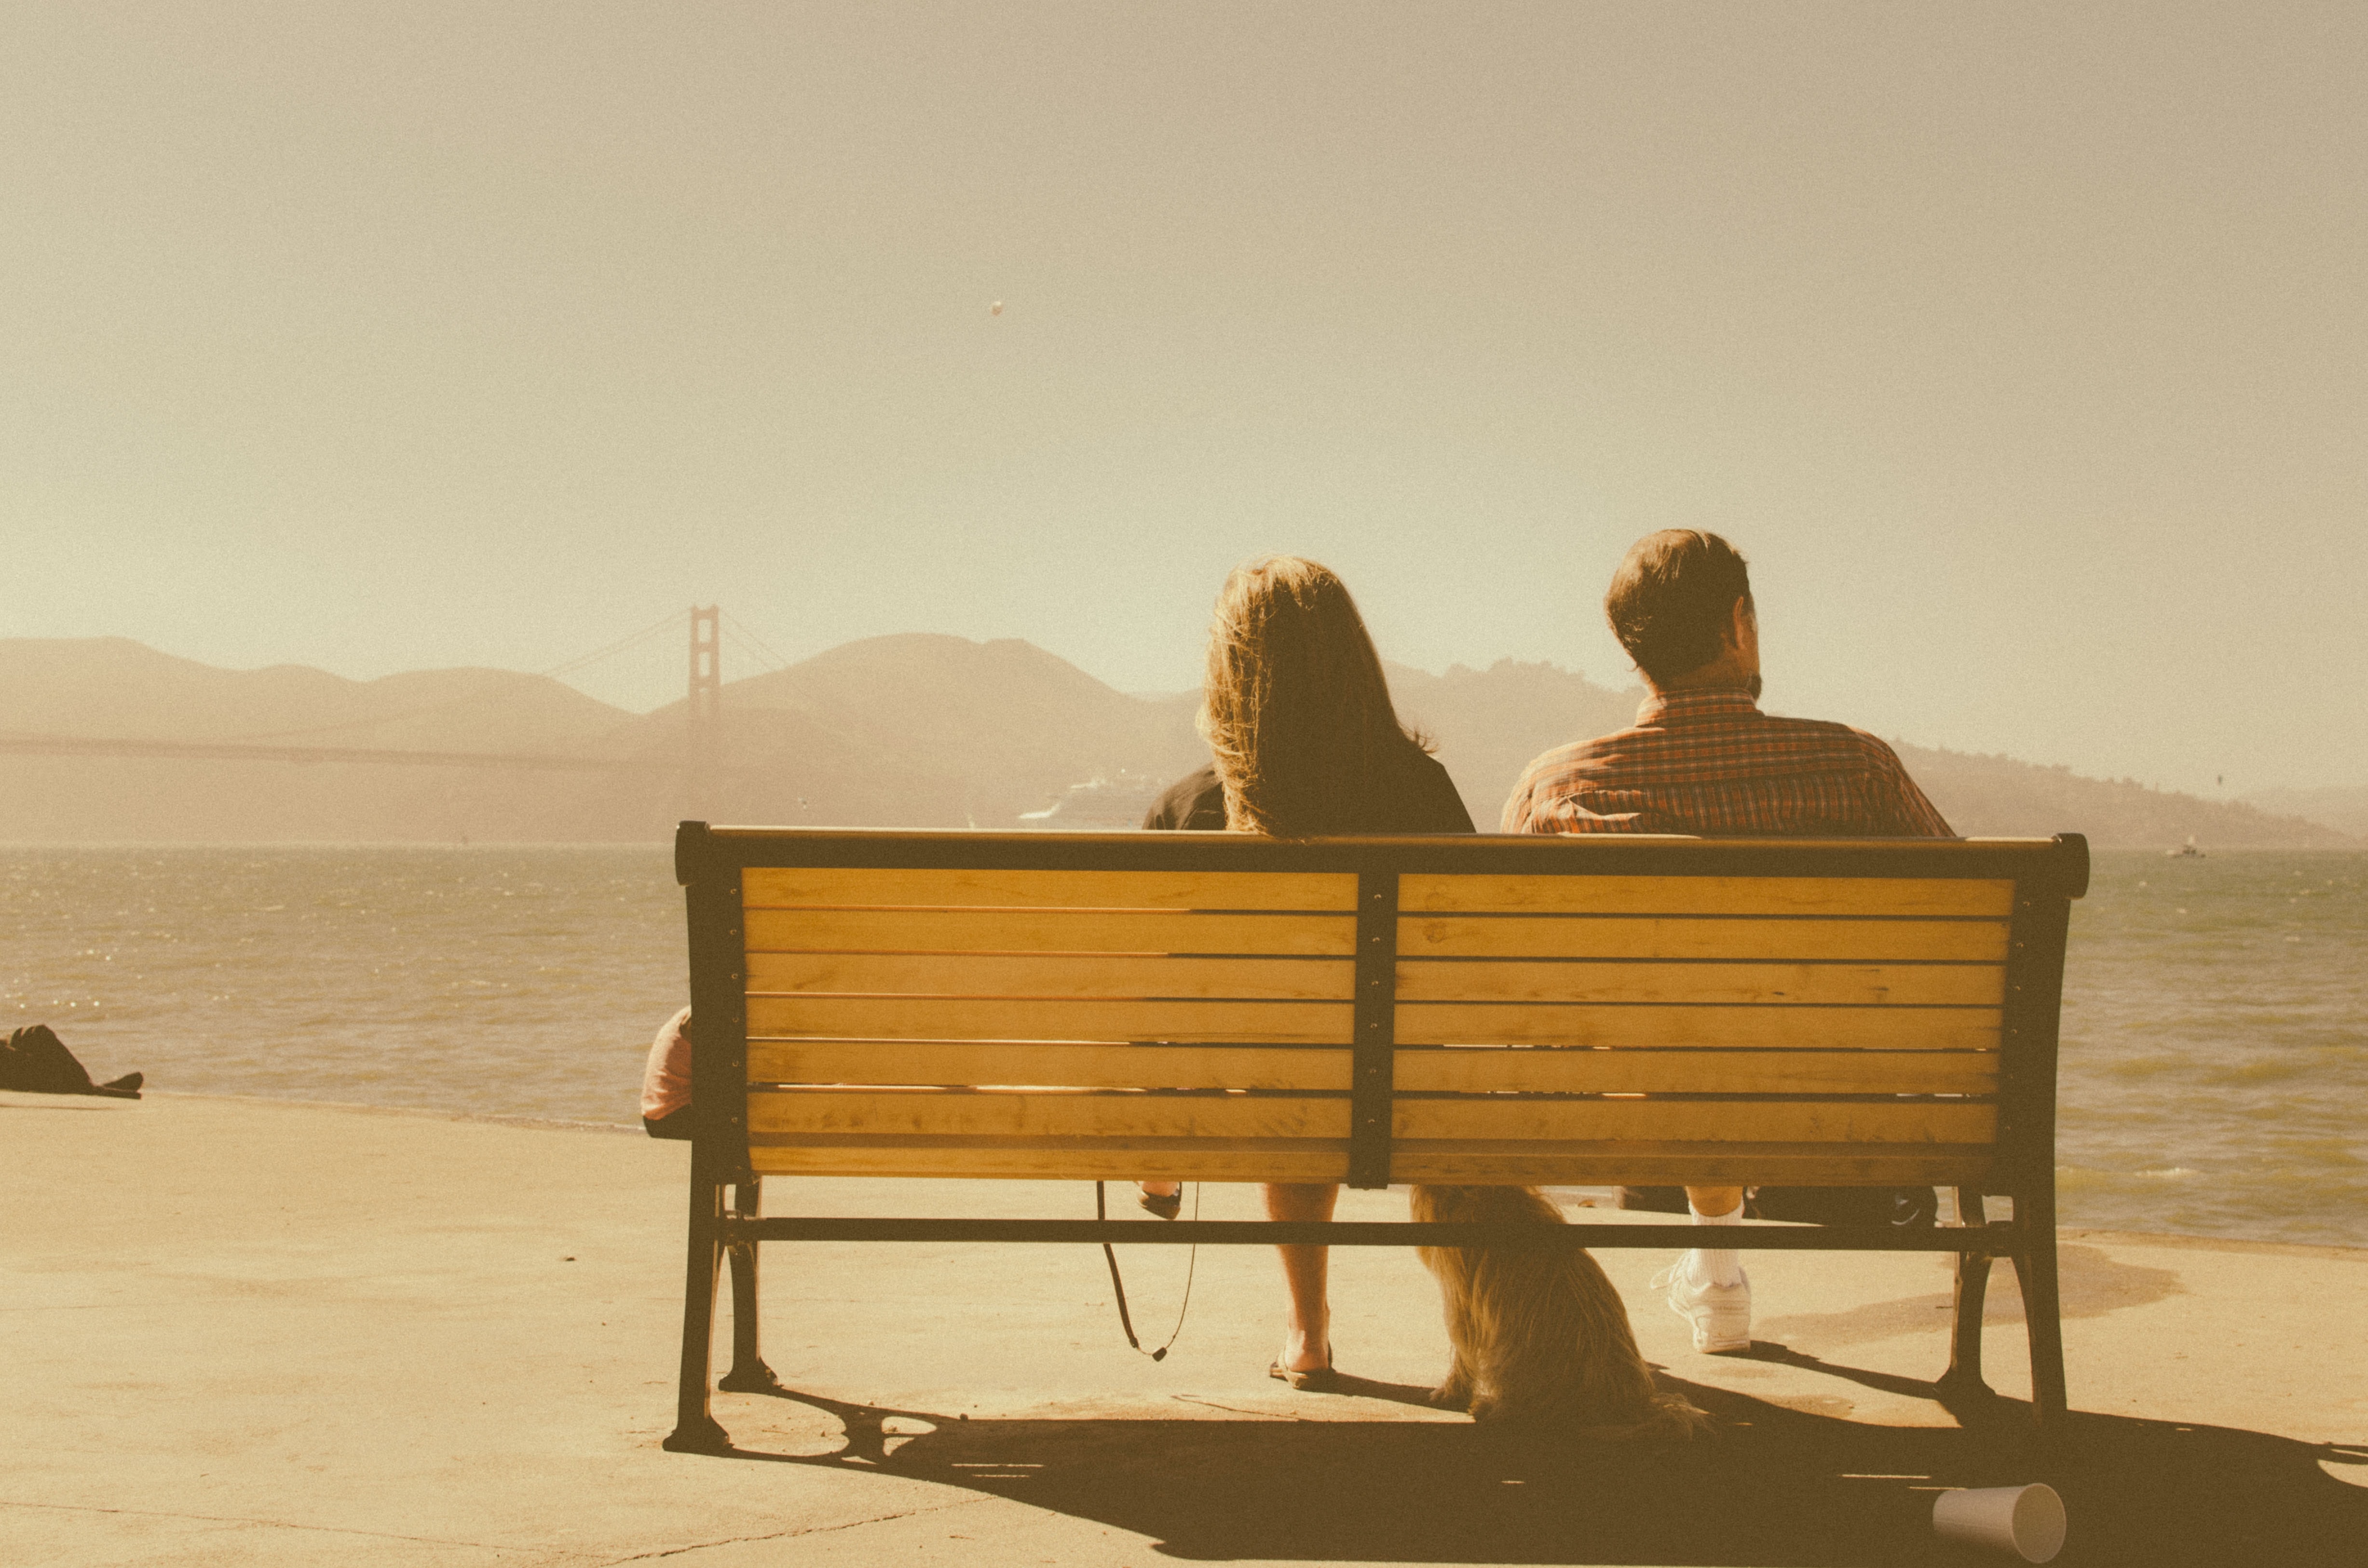 A couple sits on a bench.